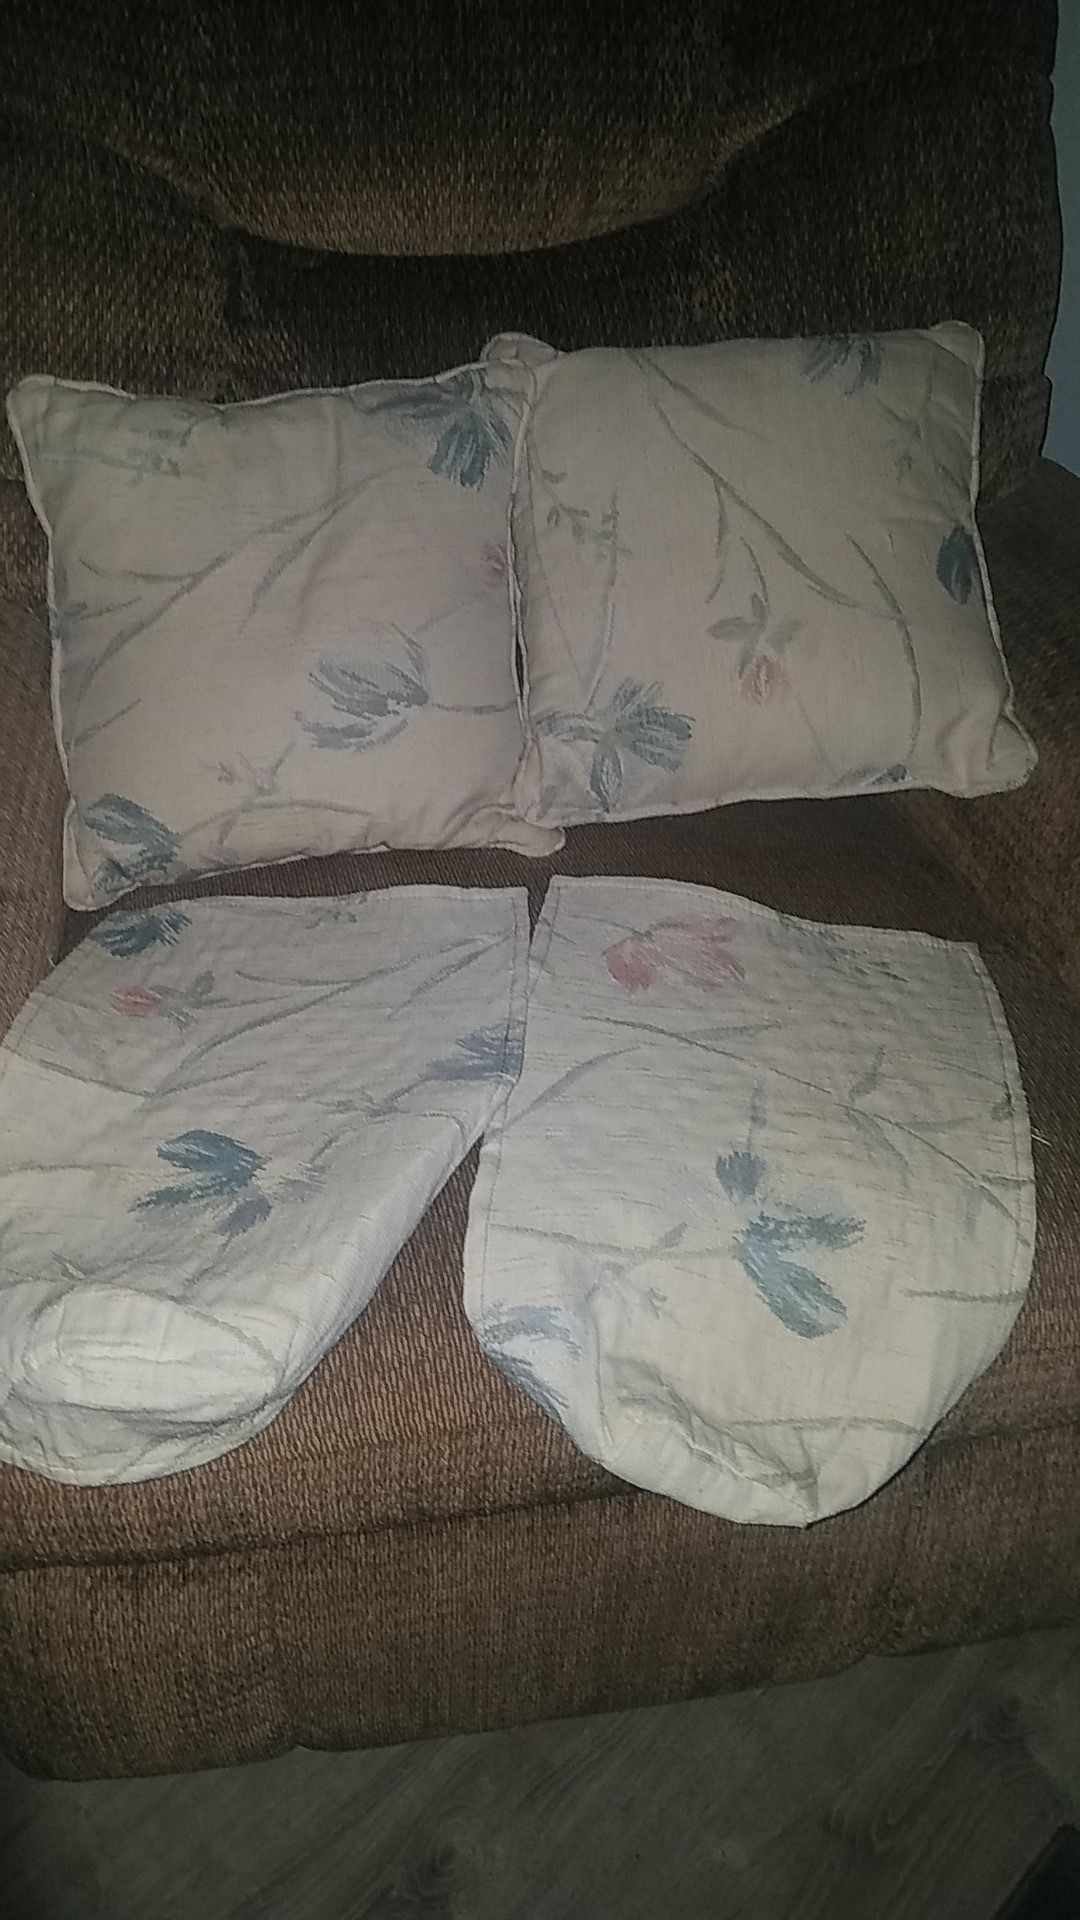 Pillows go to the couch I gave away last week